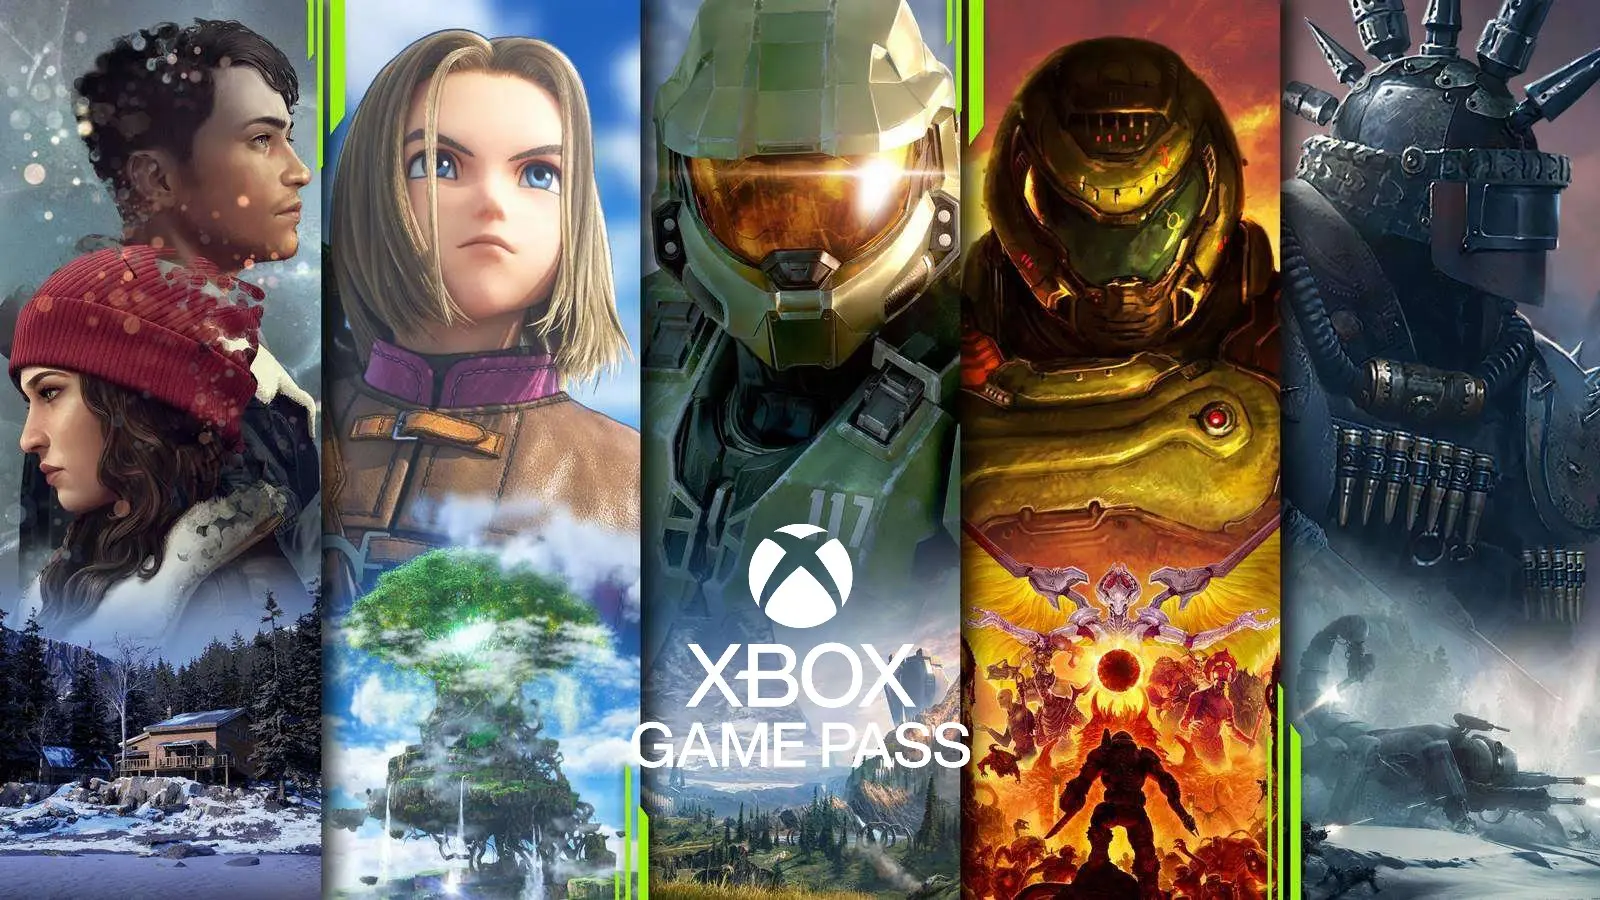 Microsoft's Xbox Game Pass Might Actually Be The Best Value In Gaming